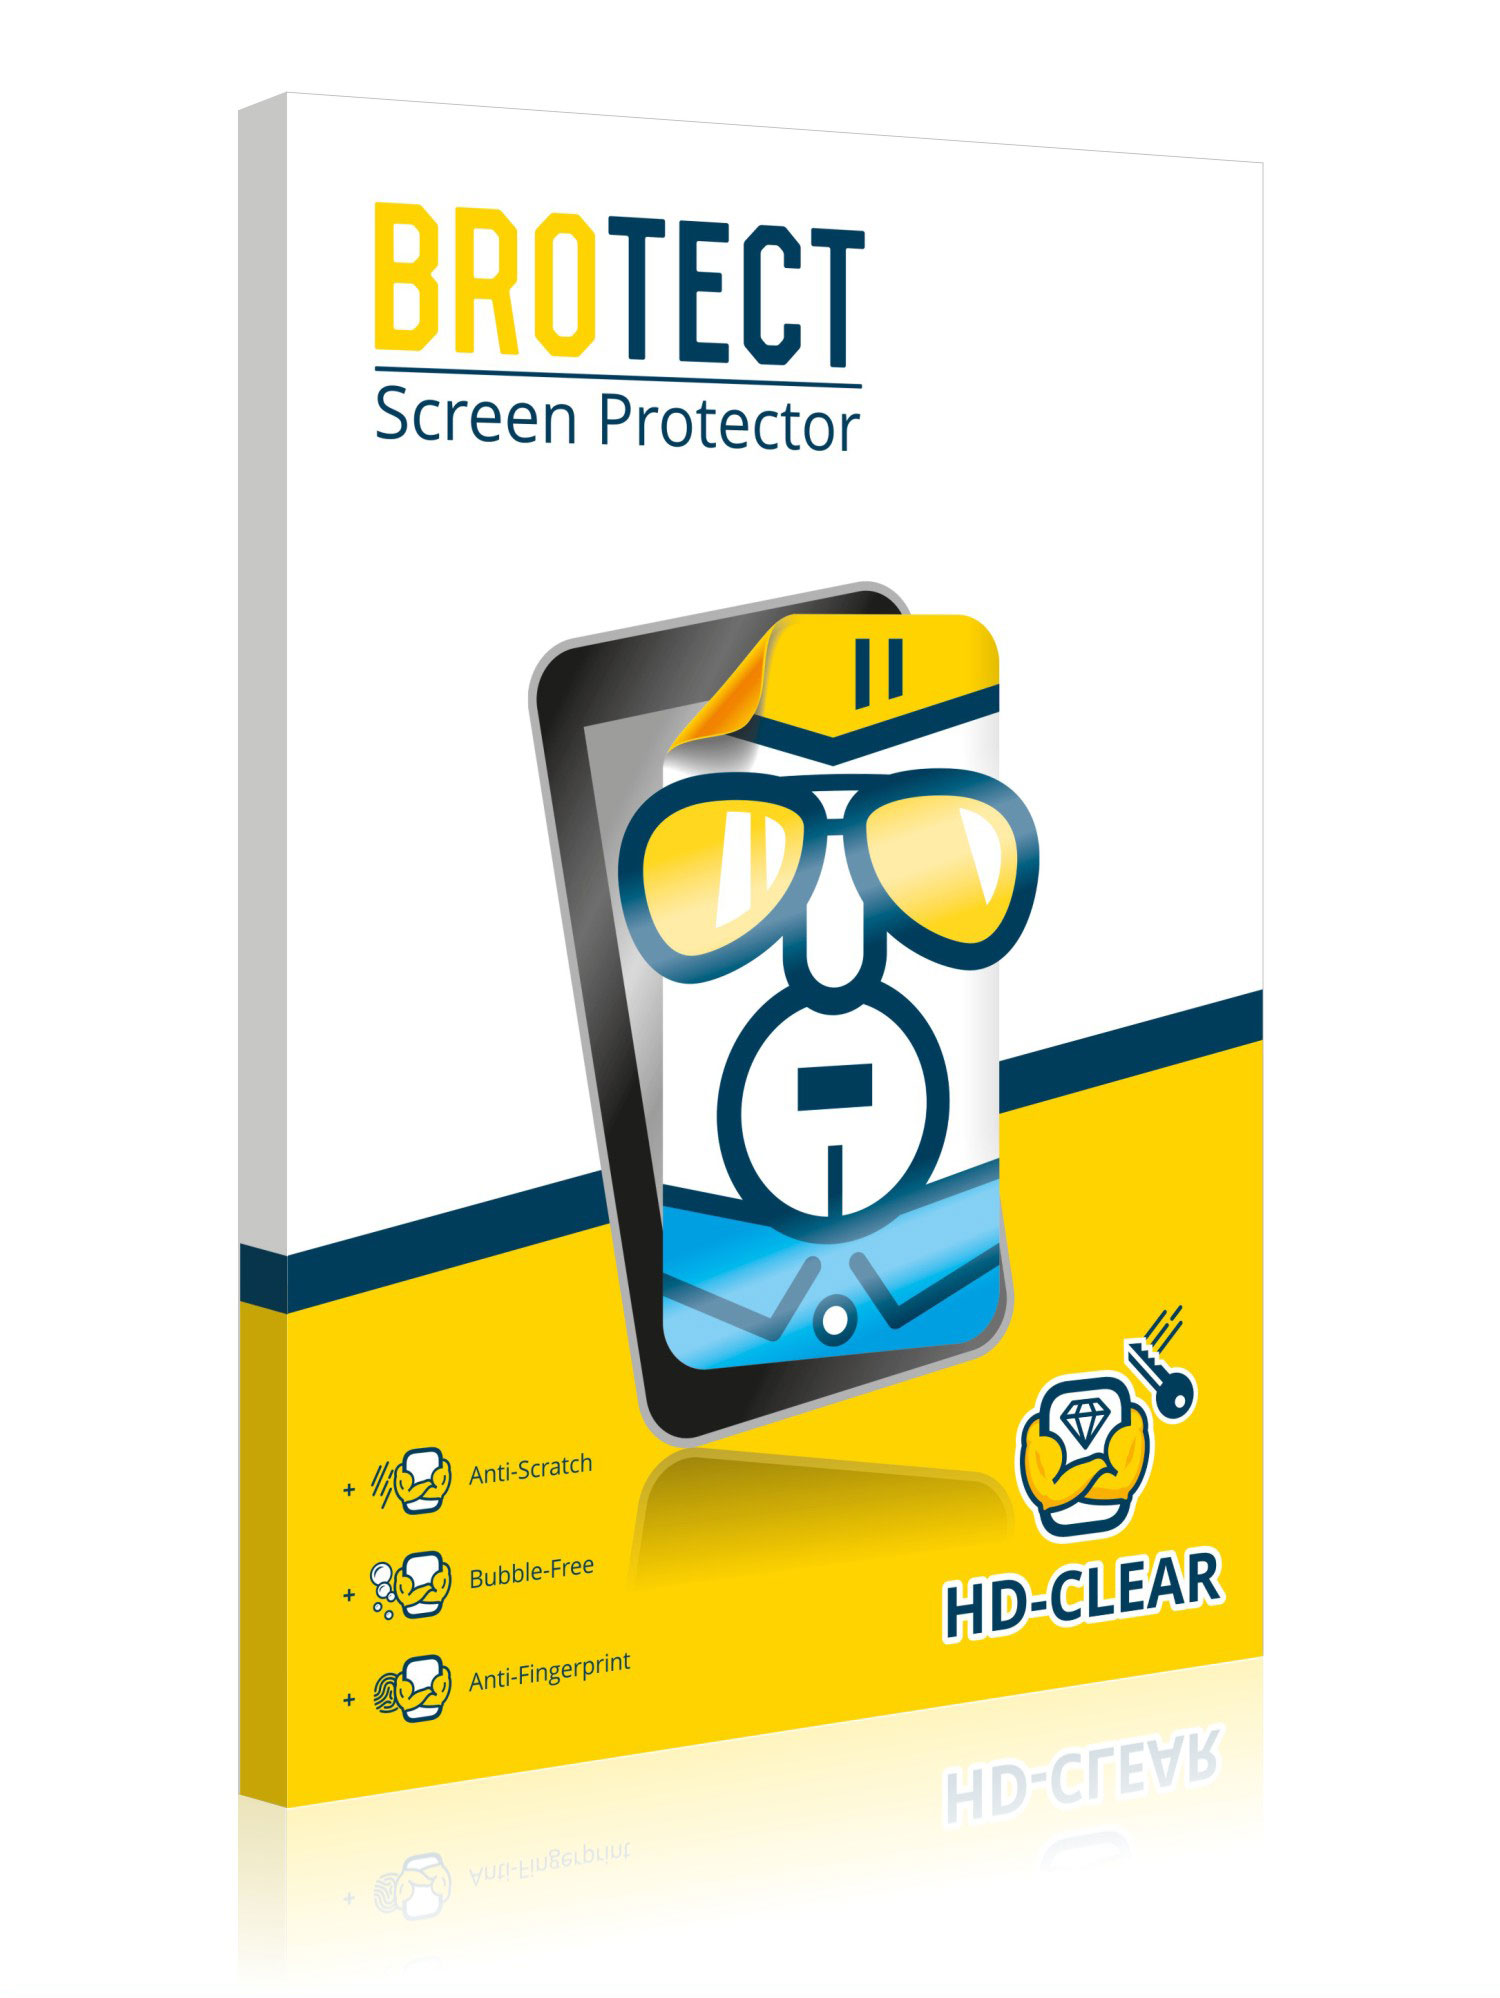 2x brotect Protective Film for CHUWI vx8 Protection Screen Protector 